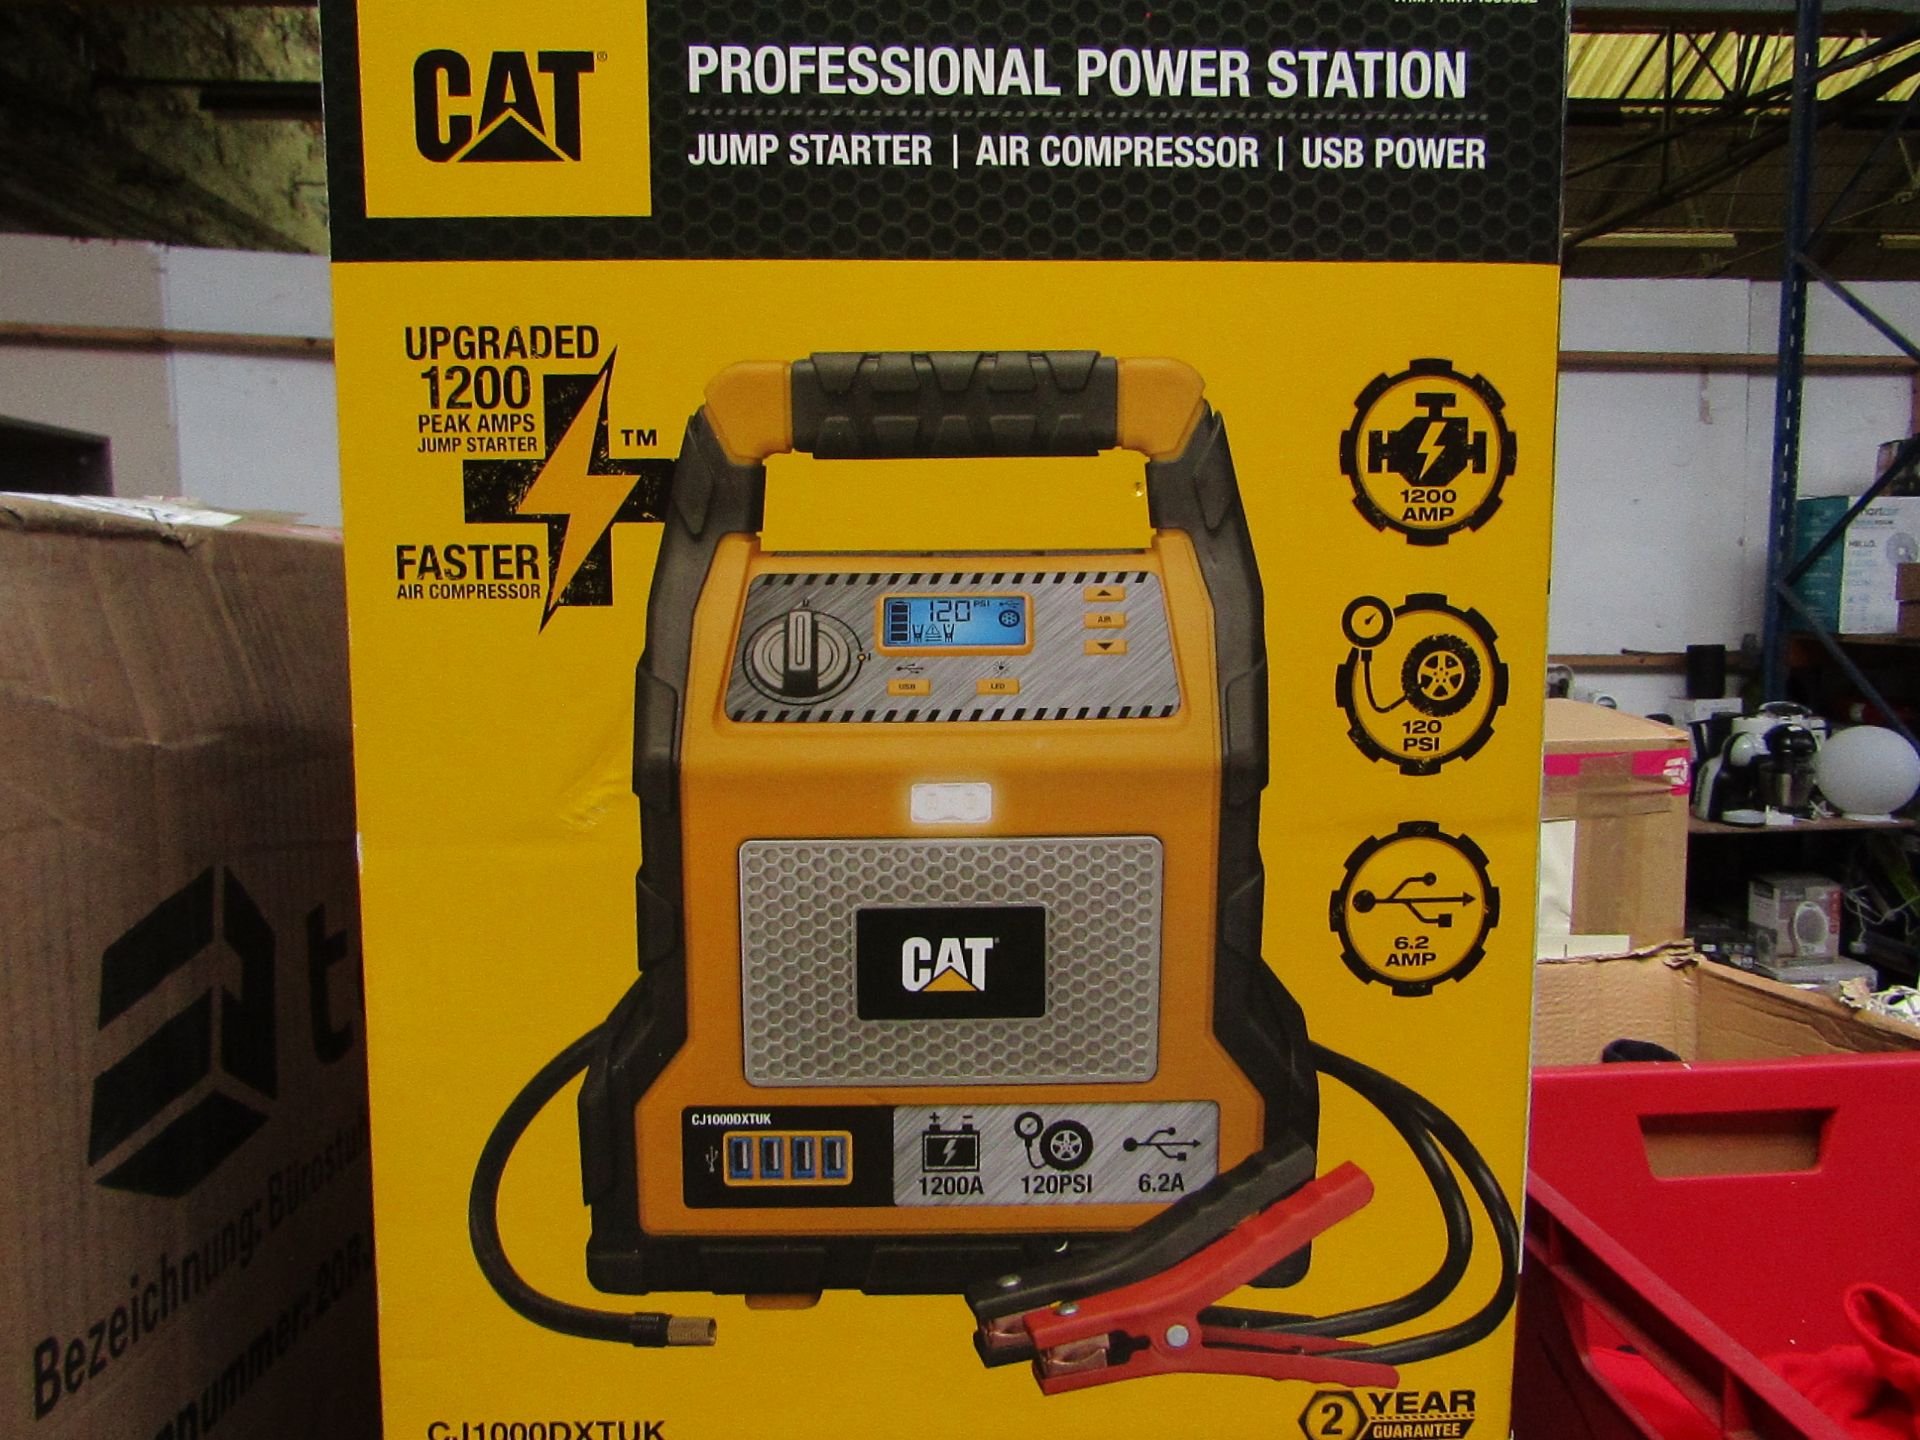 CAT - Professional Power Station 1200Amp ( Jump Starter, Air Compressor, USB Power ) - Untested &